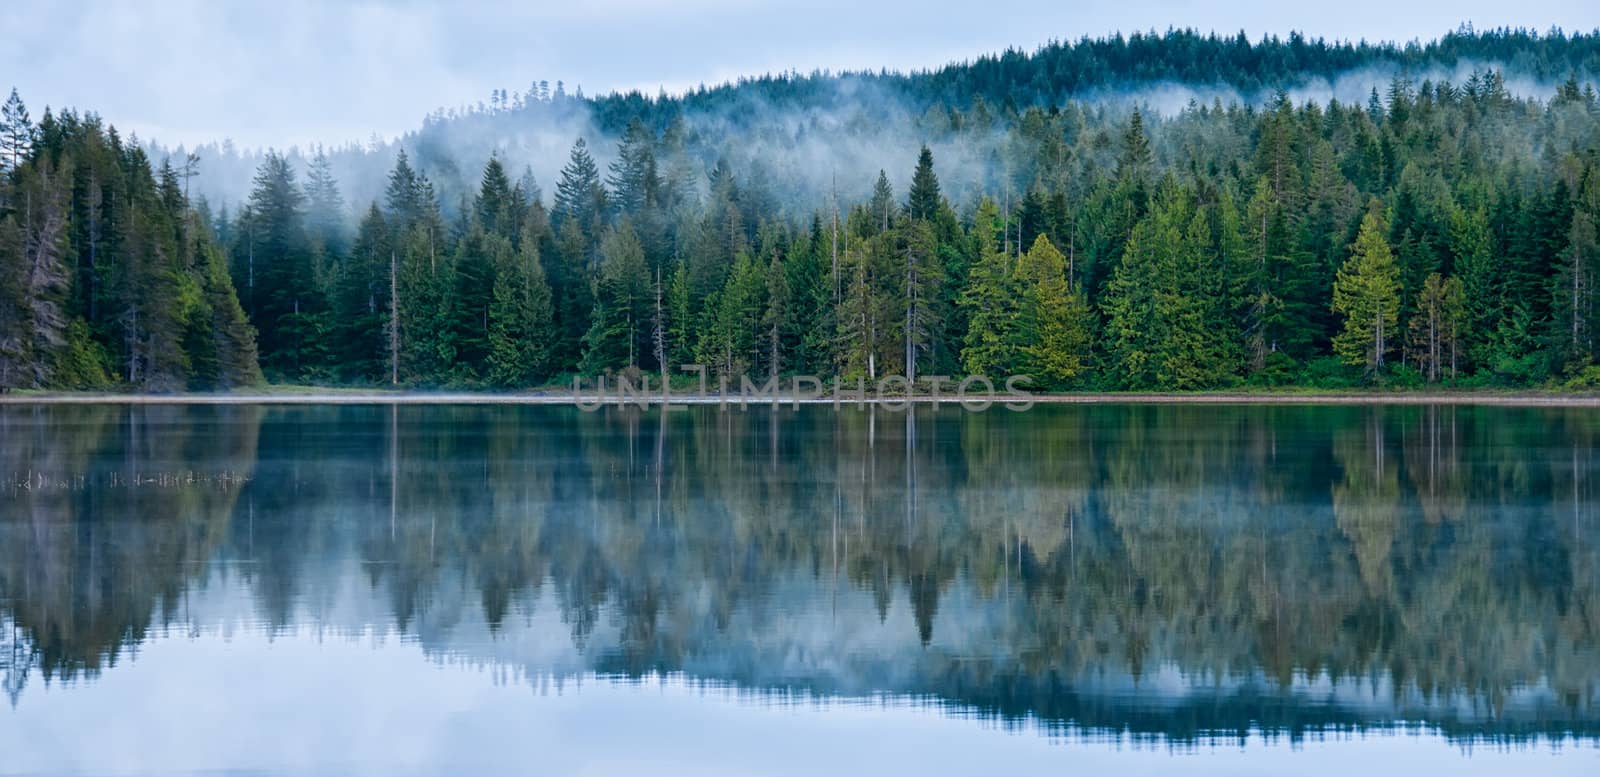 Perfect reflection of misty forest in still calming lake